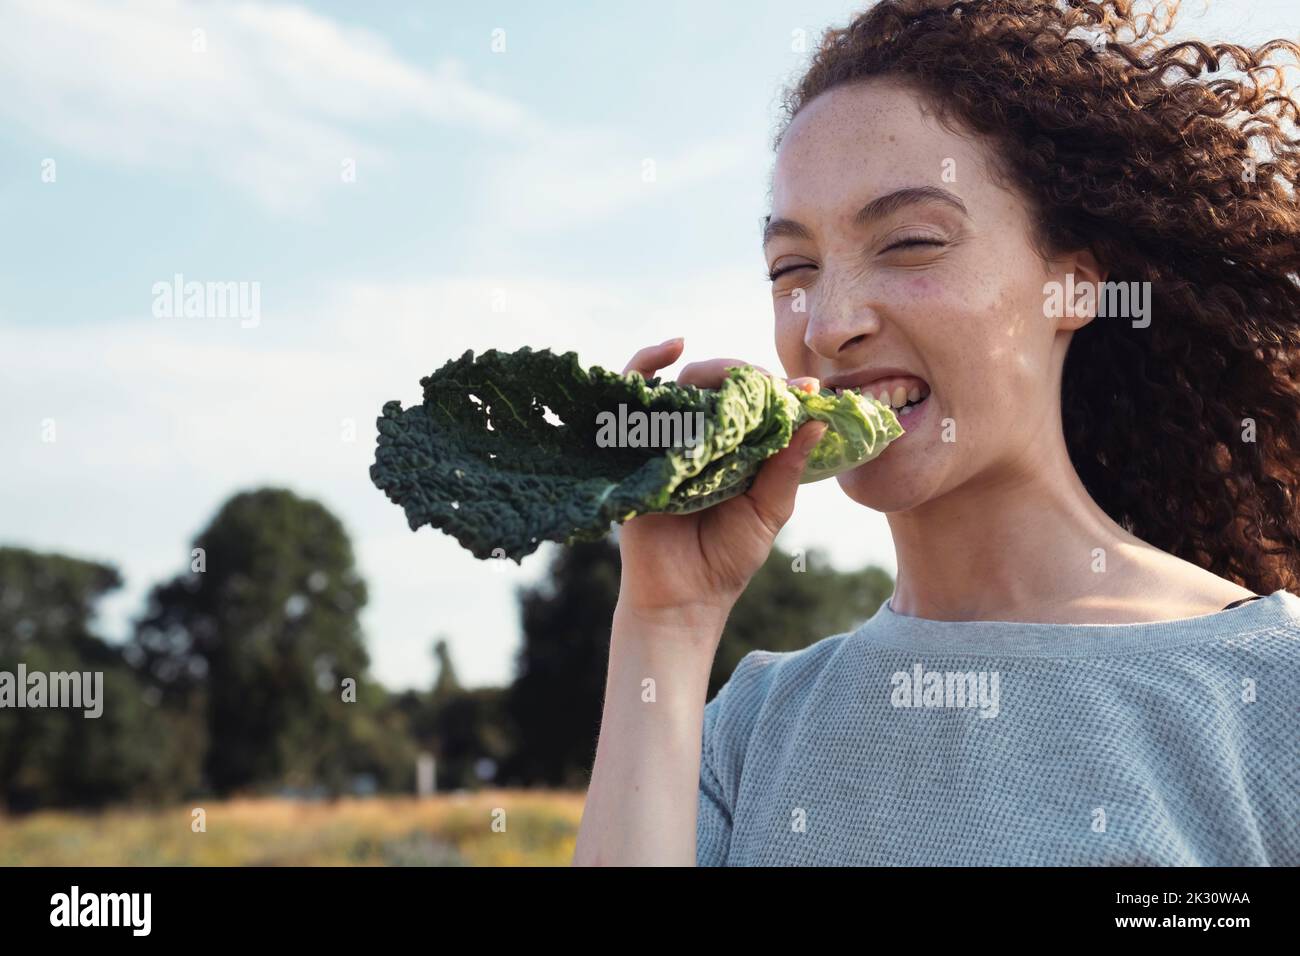 Woman with curly hair biting kale leaf Stock Photo